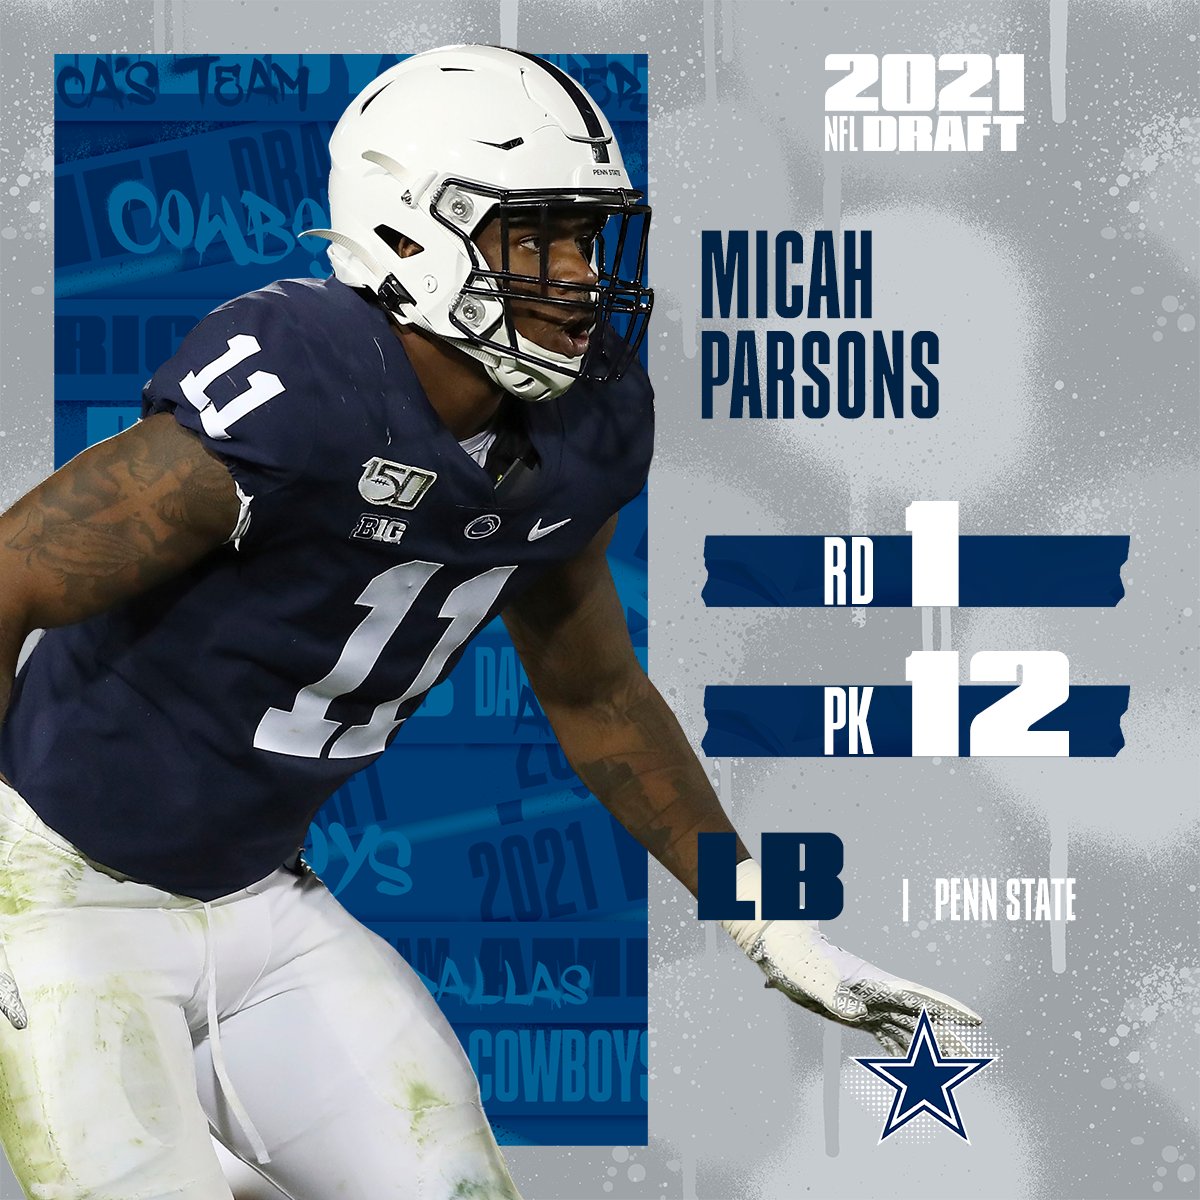 Dallas Cowboys take Micah Parsons with No. 12 pick in NFL draft after trade  with rival Philadelphia Eagles - ESPN